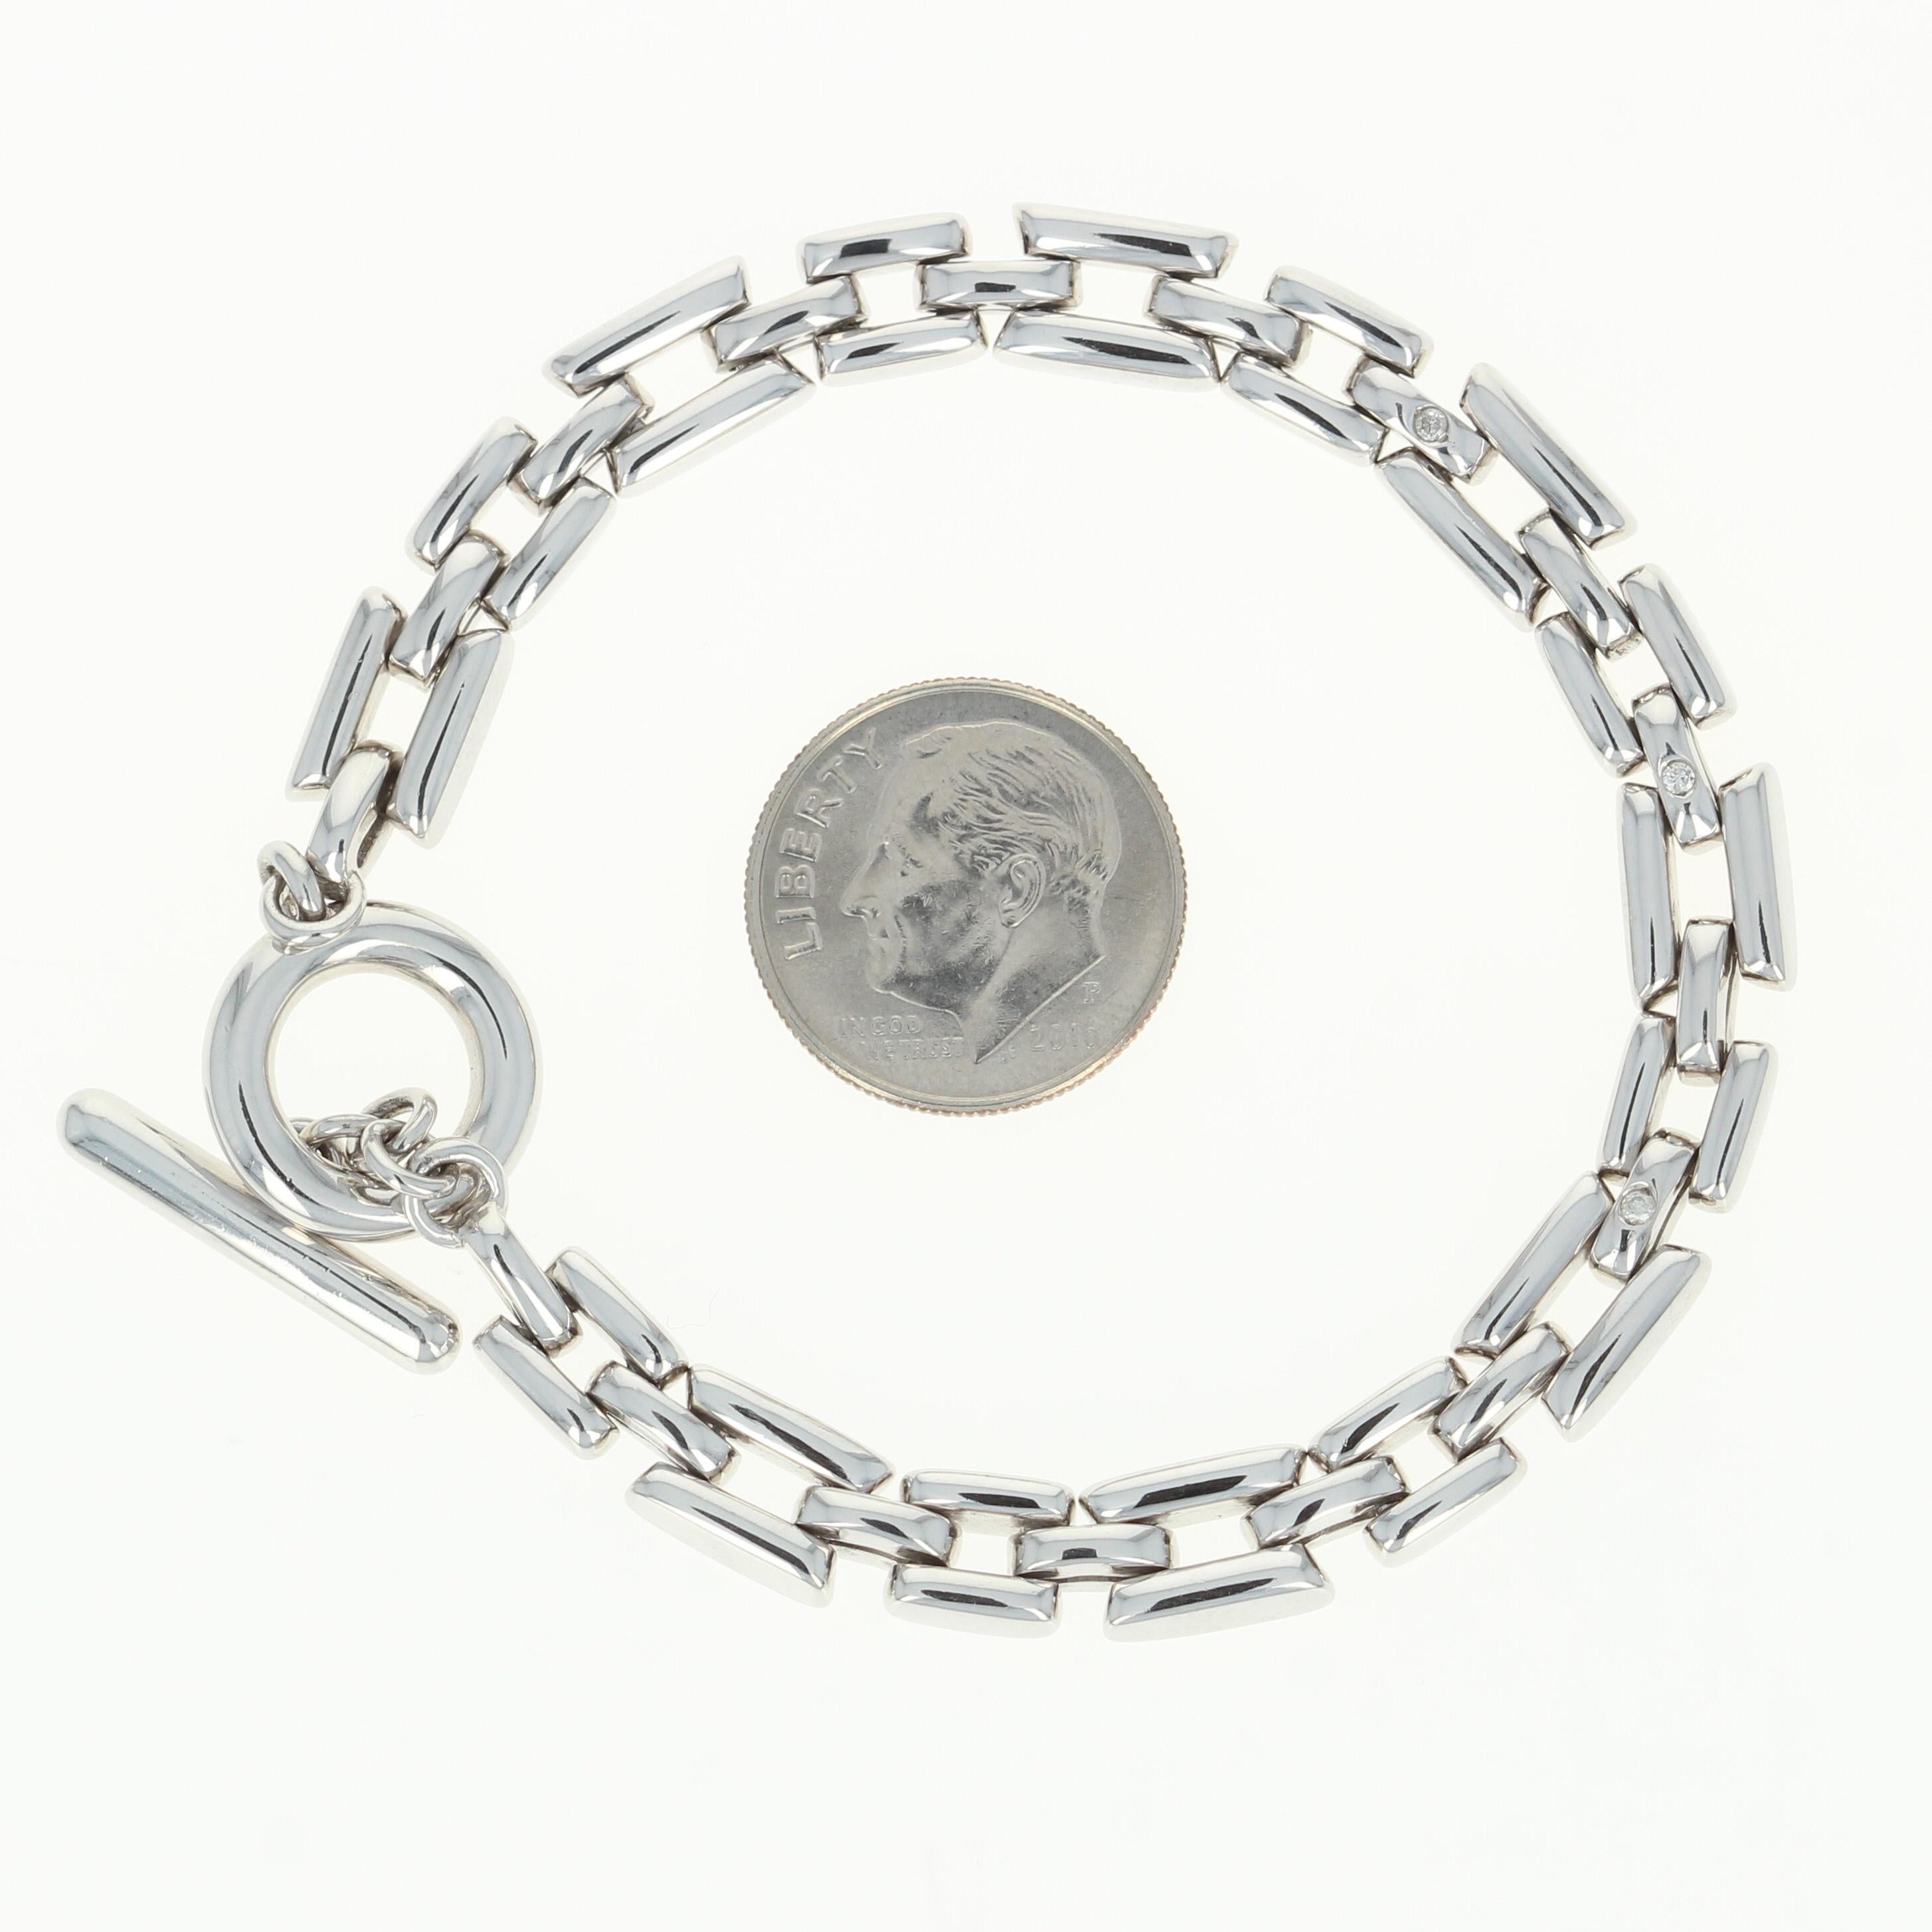 New Round Cut Diamond-Accented Link Bracelet, Silver Toggle Clasp 1